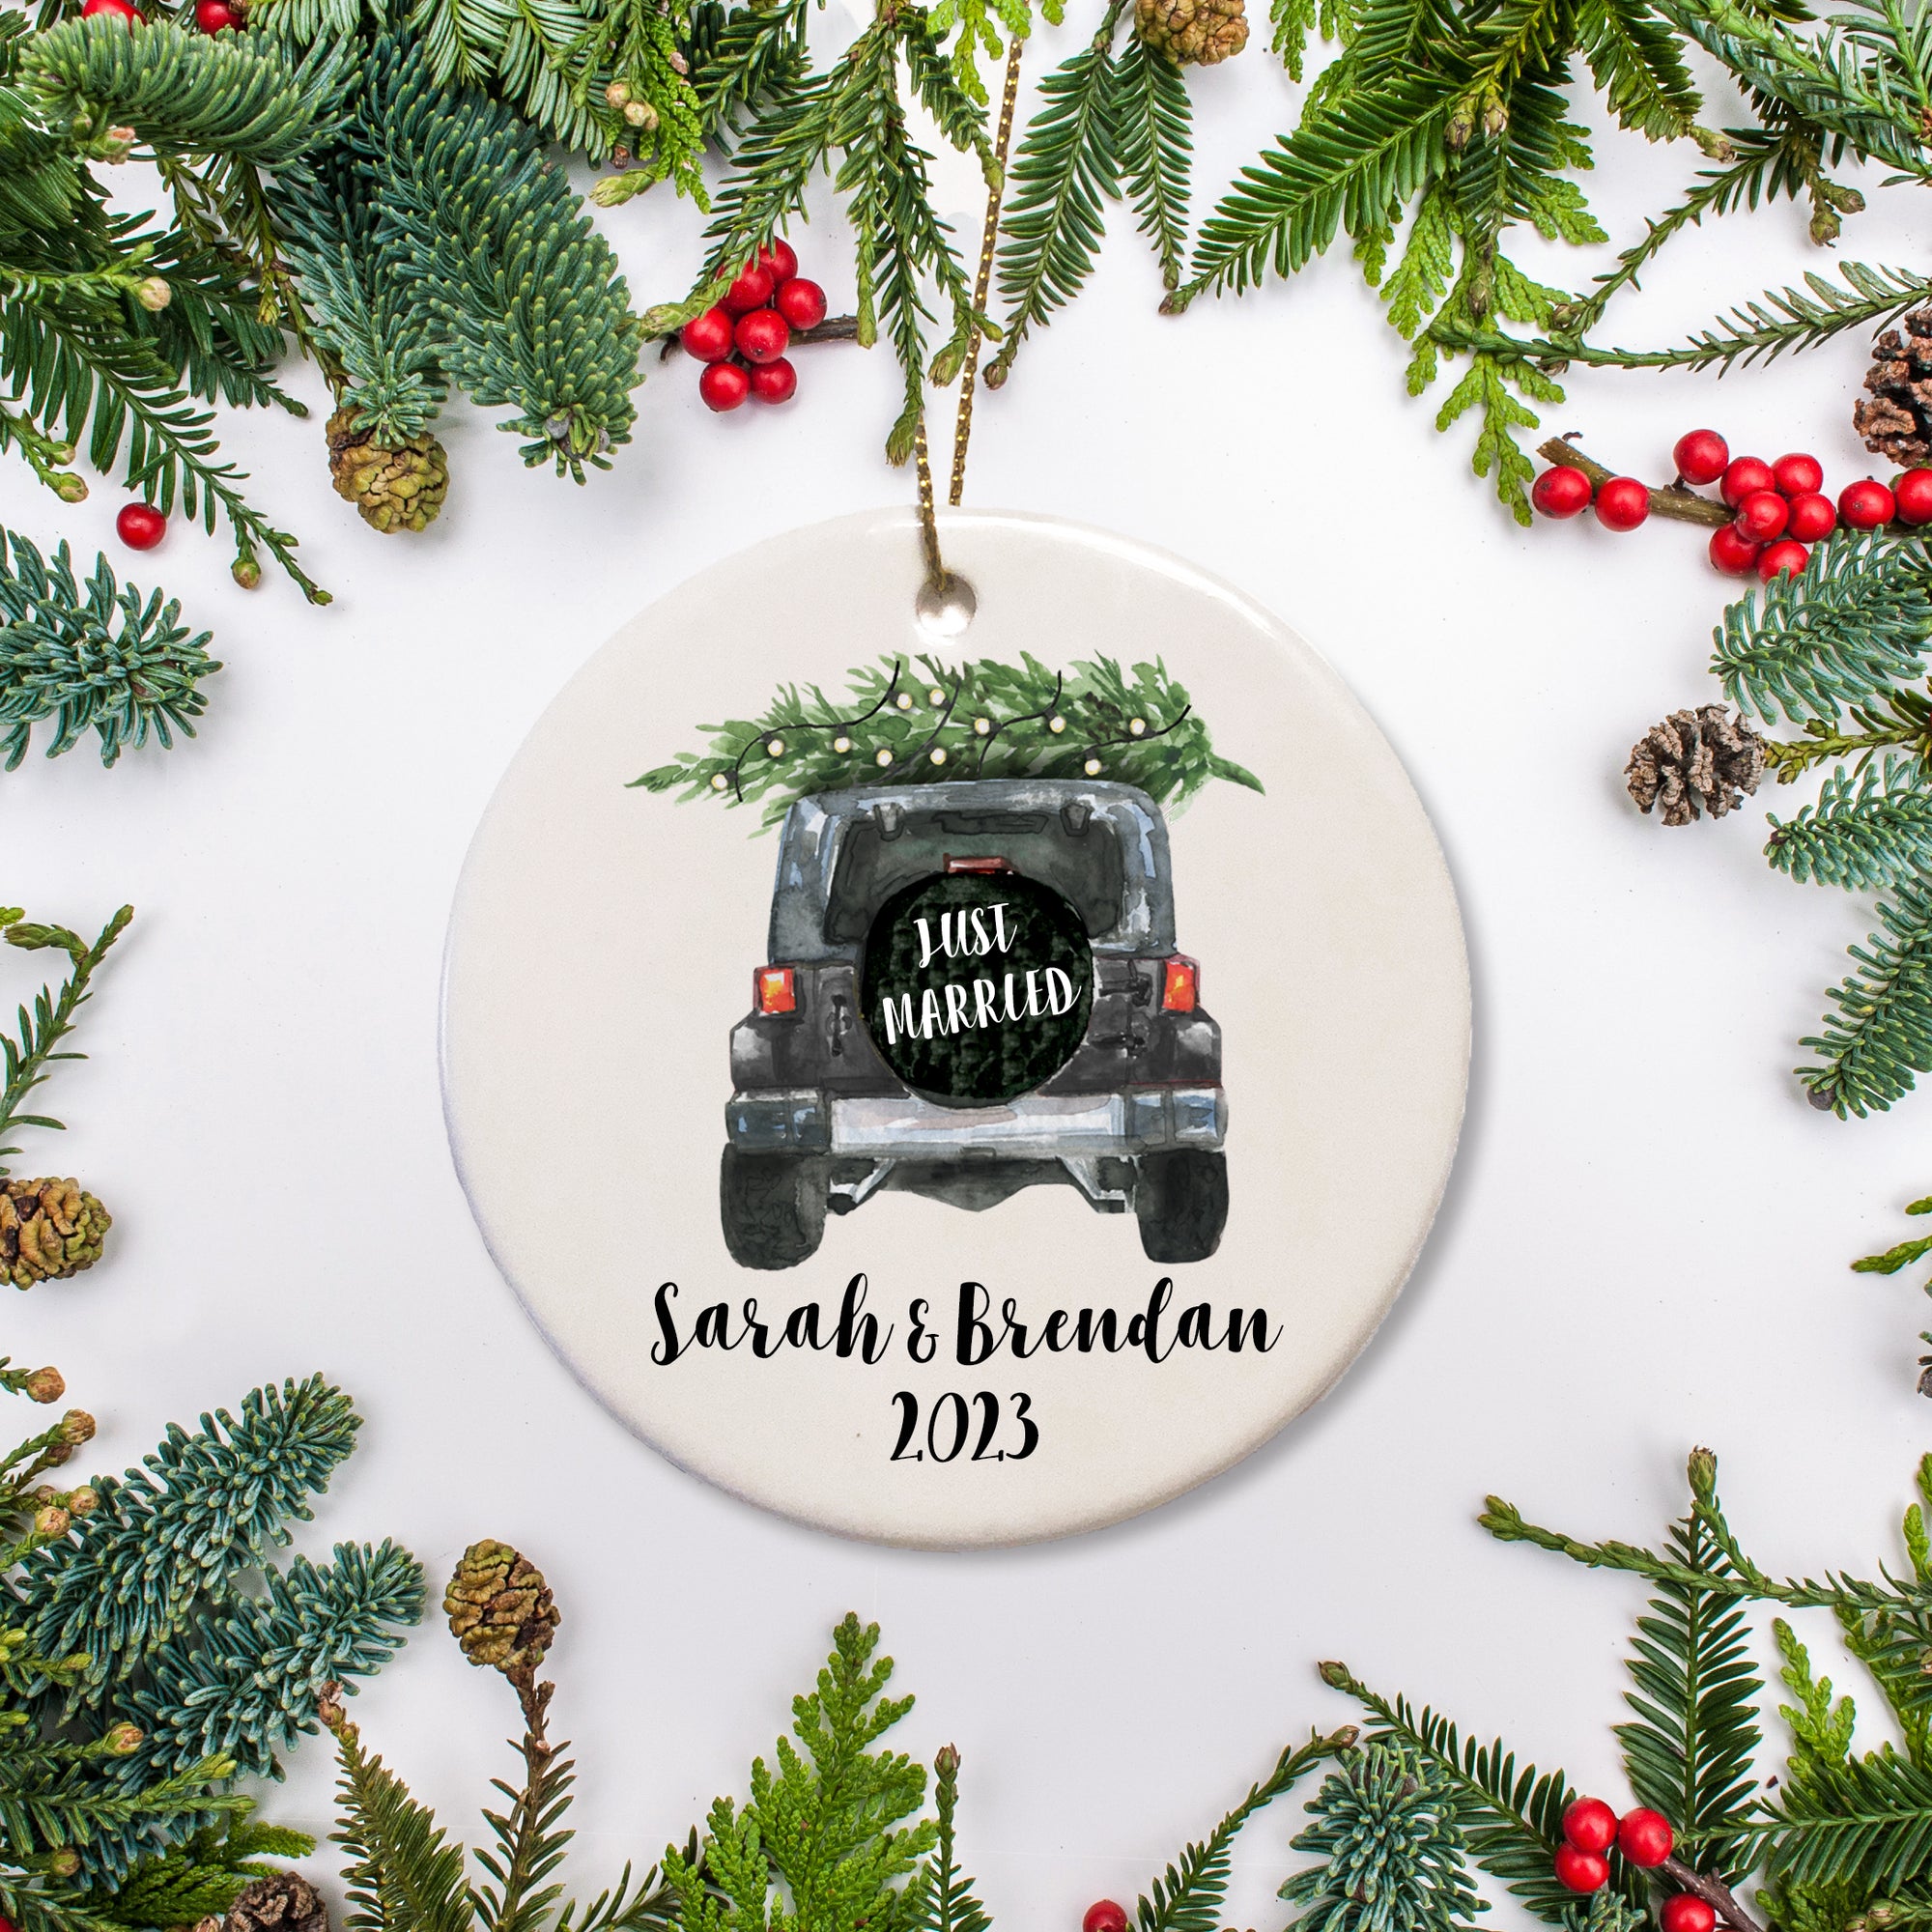 A keepsake ornament of a jeep which says “Just Married” with a Christmas tree which is personalized and includes the year. The jeep is black